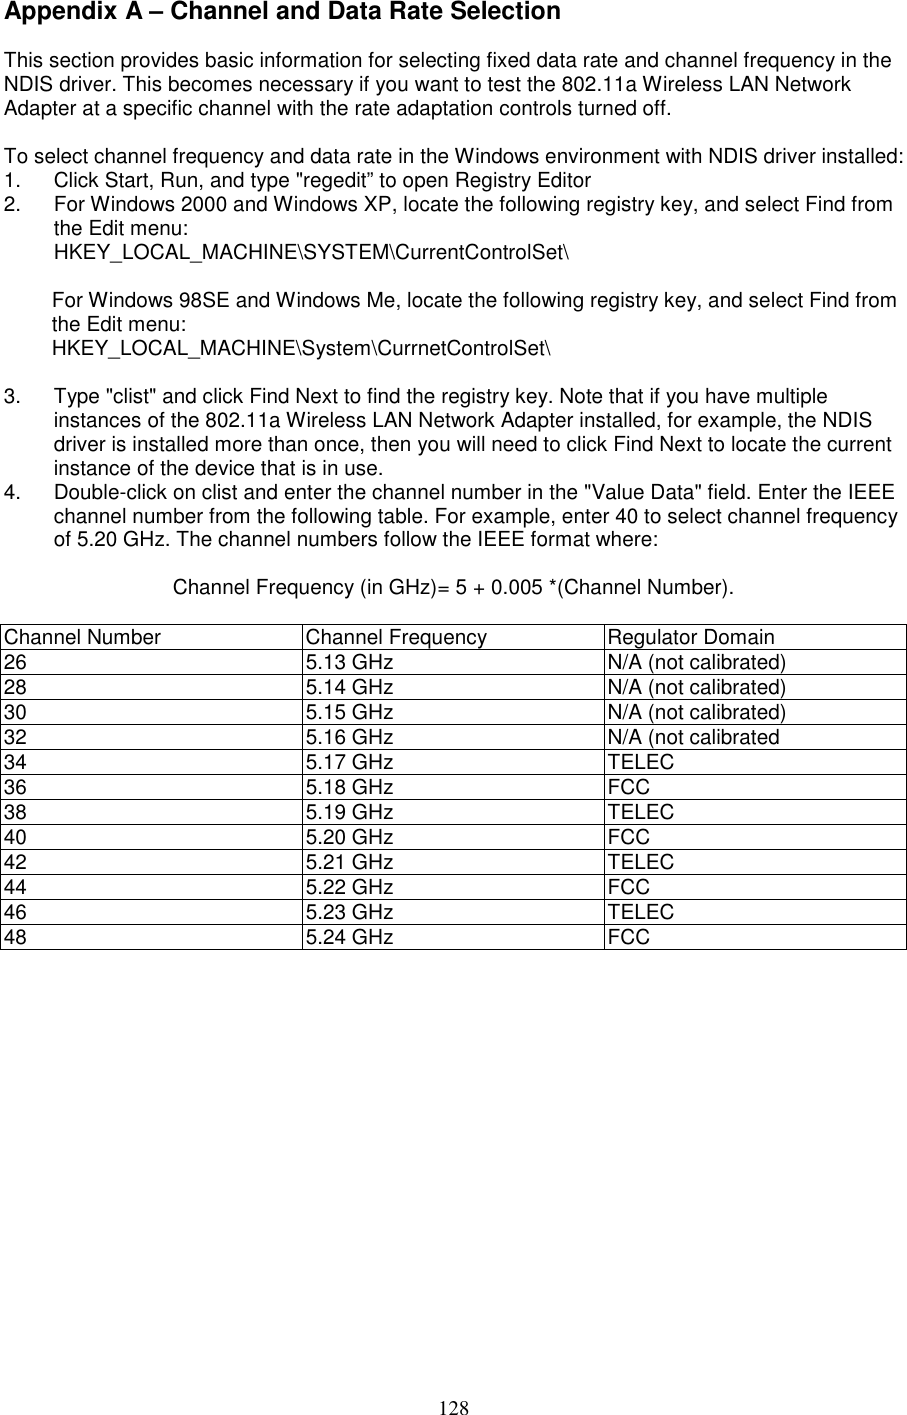 128Appendix A – Channel and Data Rate SelectionThis section provides basic information for selecting fixed data rate and channel frequency in theNDIS driver. This becomes necessary if you want to test the 802.11a Wireless LAN NetworkAdapter at a specific channel with the rate adaptation controls turned off.To select channel frequency and data rate in the Windows environment with NDIS driver installed:1.  Click Start, Run, and type &quot;regedit” to open Registry Editor2.  For Windows 2000 and Windows XP, locate the following registry key, and select Find fromthe Edit menu:HKEY_LOCAL_MACHINE\SYSTEM\CurrentControlSet\For Windows 98SE and Windows Me, locate the following registry key, and select Find fromthe Edit menu:HKEY_LOCAL_MACHINE\System\CurrnetControlSet\3.  Type &quot;clist&quot; and click Find Next to find the registry key. Note that if you have multipleinstances of the 802.11a Wireless LAN Network Adapter installed, for example, the NDISdriver is installed more than once, then you will need to click Find Next to locate the currentinstance of the device that is in use.4.  Double-click on clist and enter the channel number in the &quot;Value Data&quot; field. Enter the IEEEchannel number from the following table. For example, enter 40 to select channel frequencyof 5.20 GHz. The channel numbers follow the IEEE format where:Channel Frequency (in GHz)= 5 + 0.005 *(Channel Number).Channel Number Channel Frequency Regulator Domain26 5.13 GHz N/A (not calibrated)28 5.14 GHz N/A (not calibrated)30 5.15 GHz N/A (not calibrated)32 5.16 GHz N/A (not calibrated34 5.17 GHz TELEC36 5.18 GHz FCC38 5.19 GHz TELEC40 5.20 GHz FCC42 5.21 GHz TELEC44 5.22 GHz FCC46 5.23 GHz TELEC48 5.24 GHz FCC